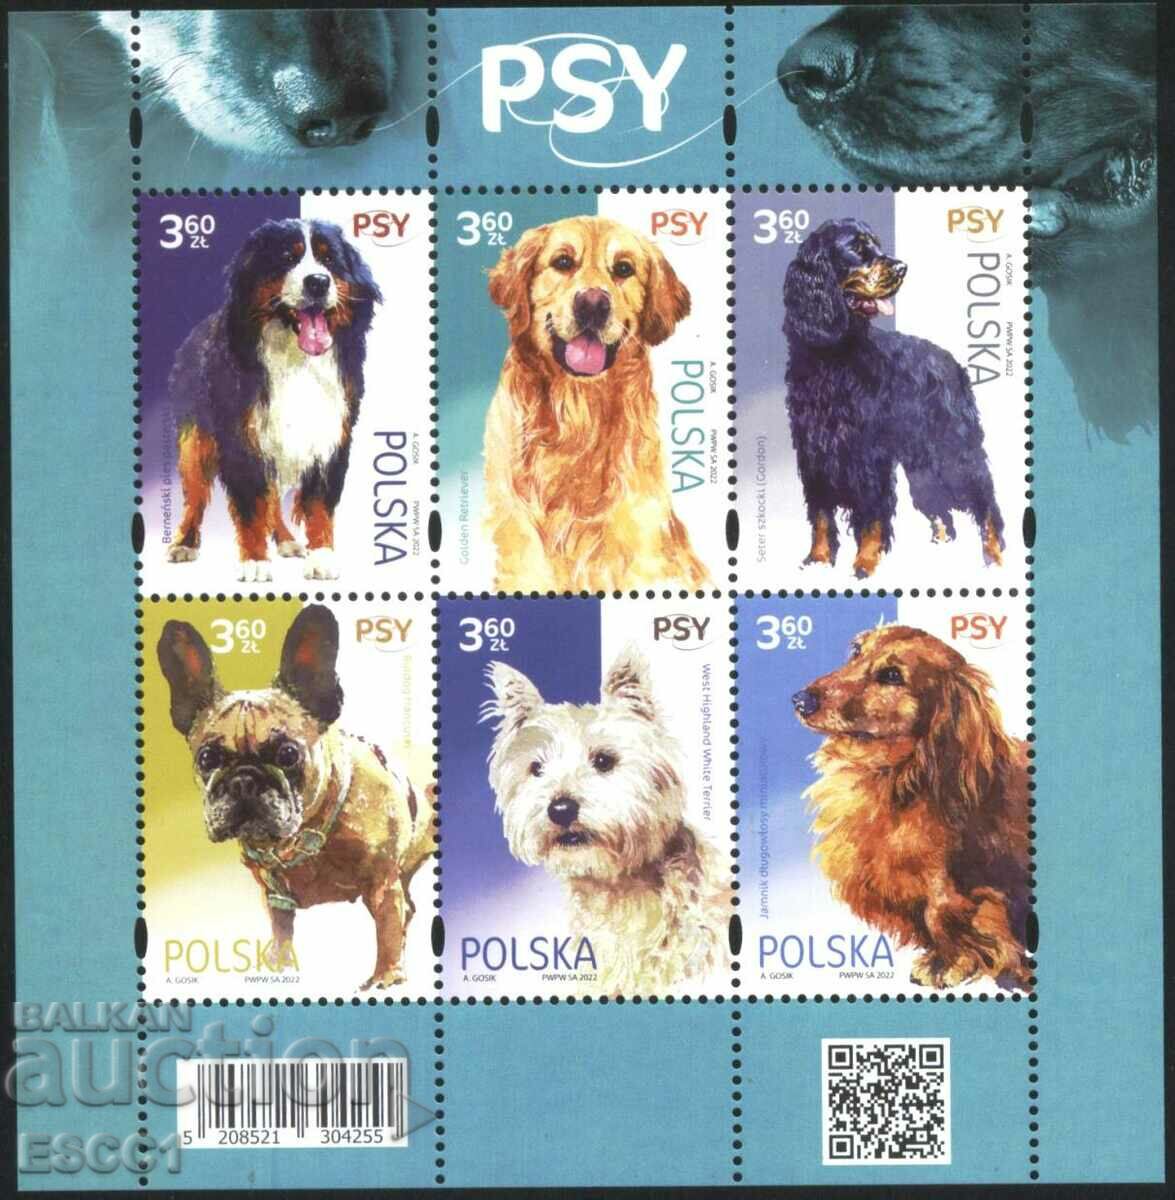 Clean stamps in small sheet Fauna Dogs 2022 from Poland